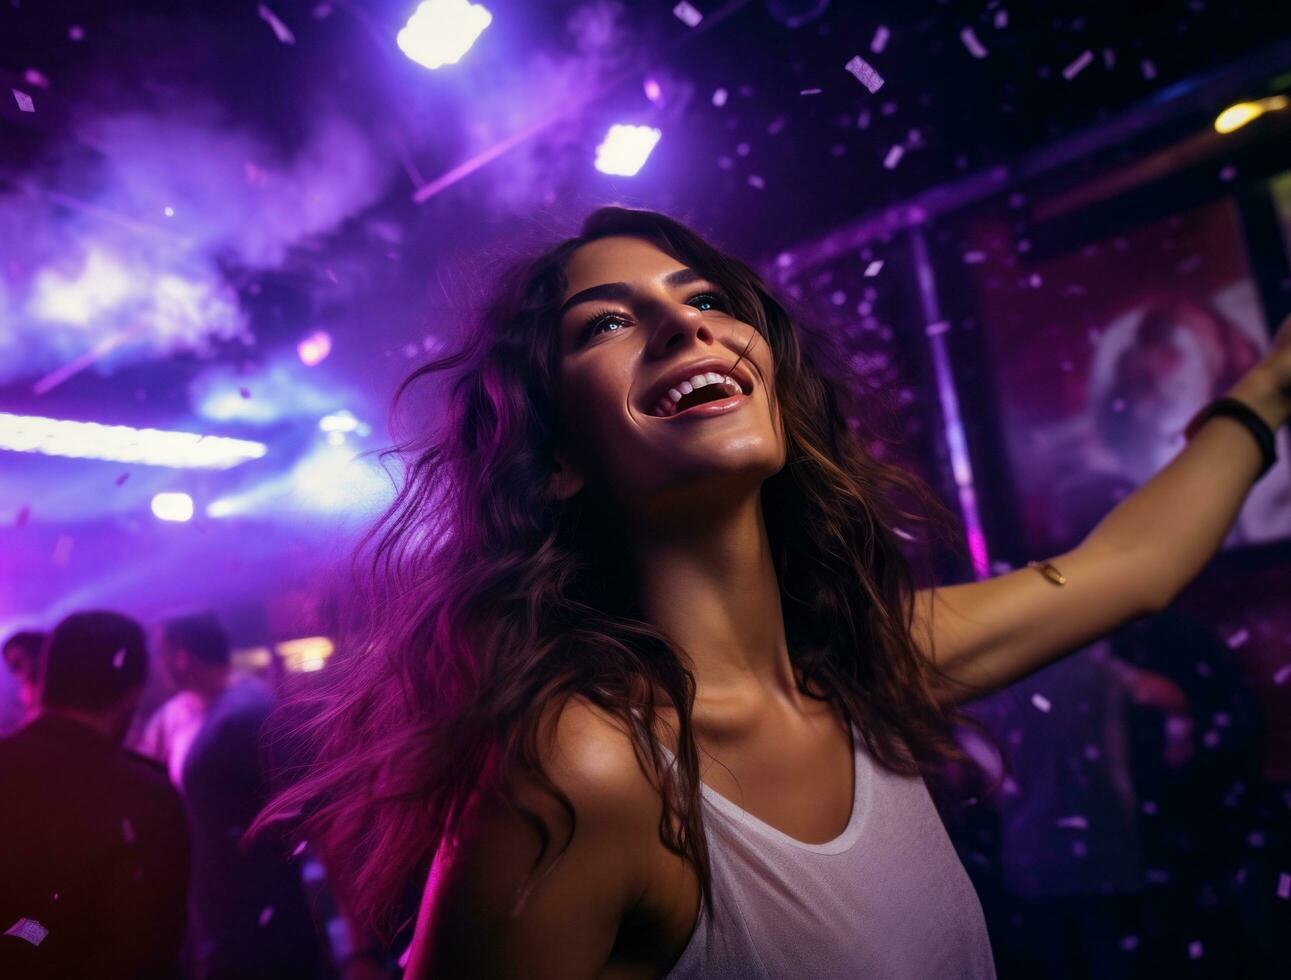 AI generated a young girls dancing in a club or nightclub photo